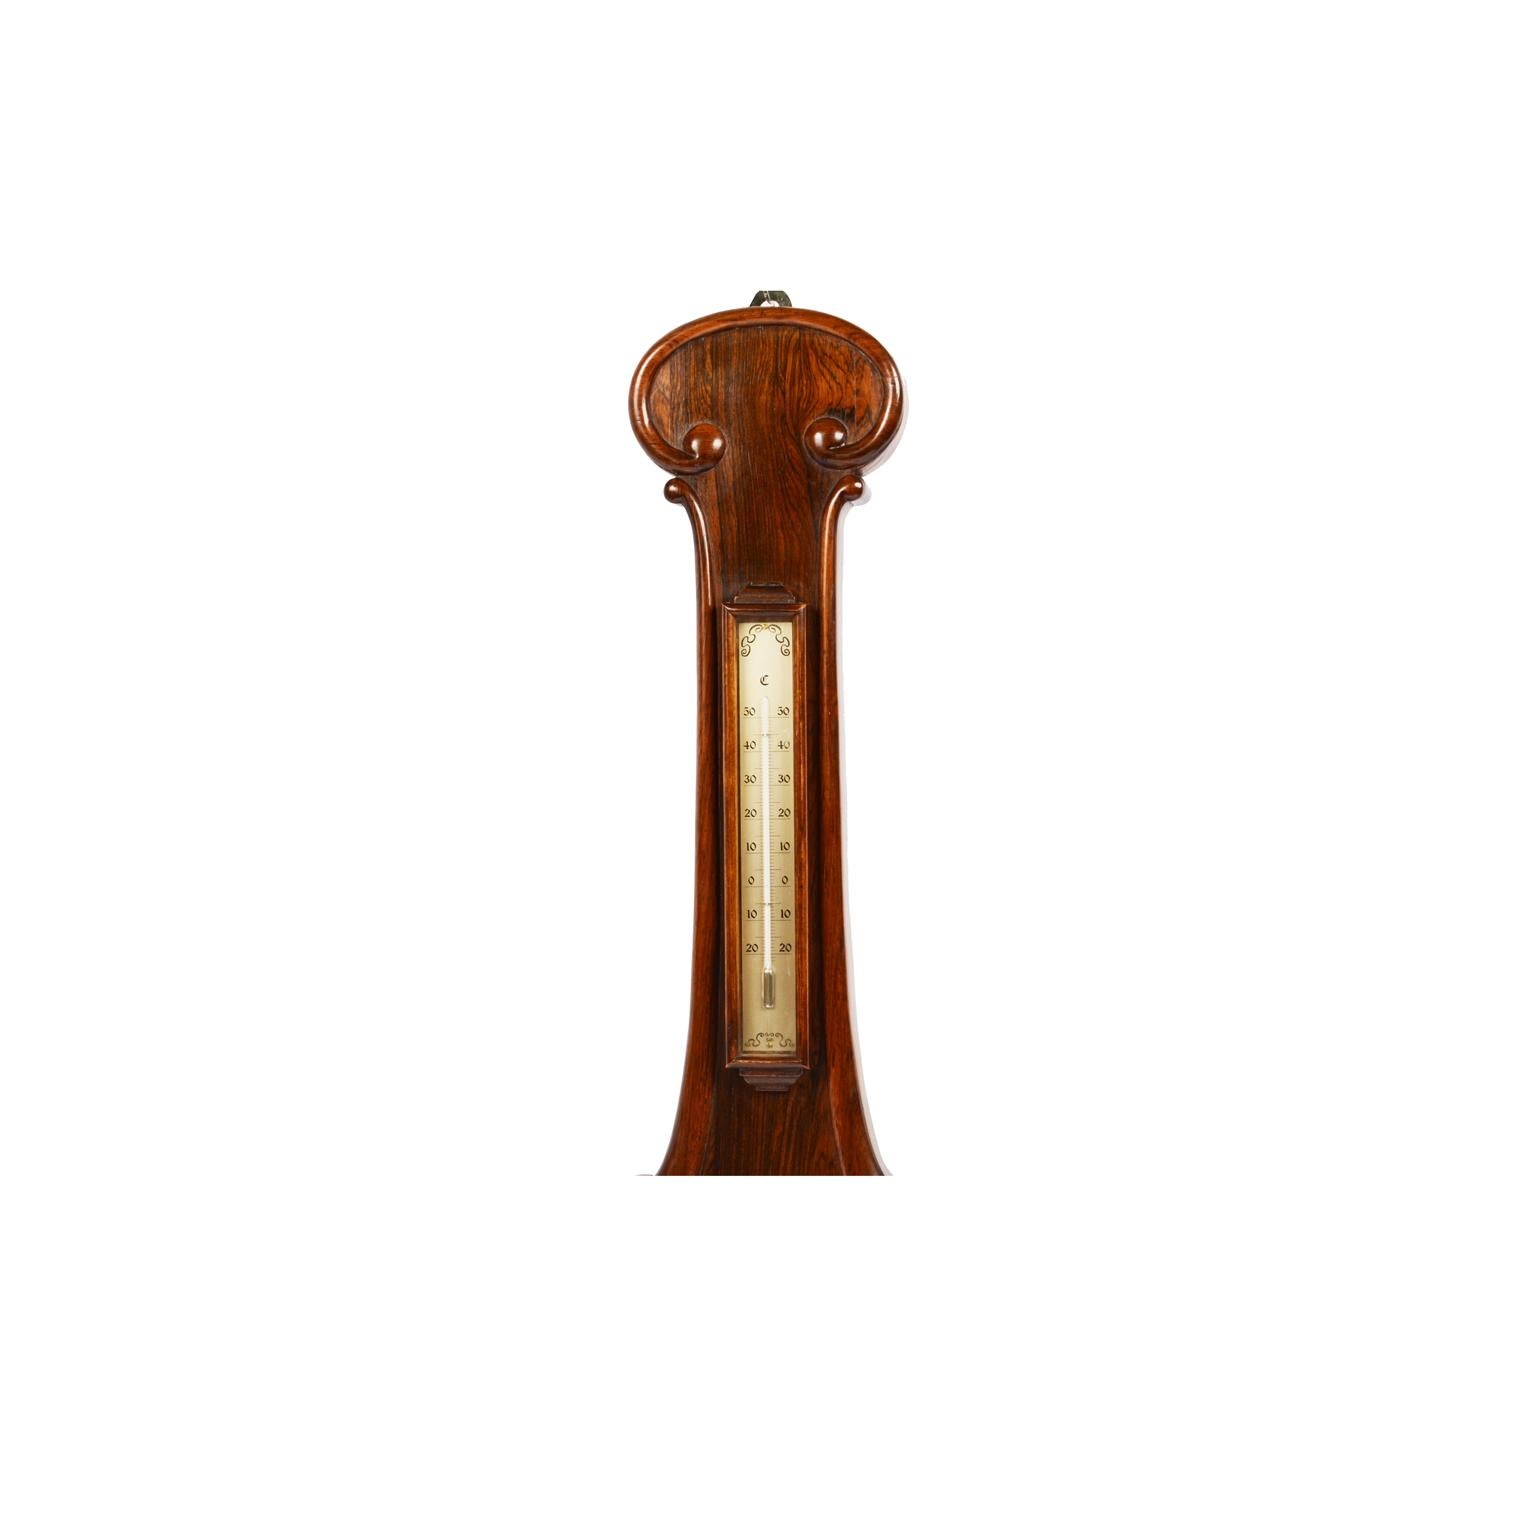 Wooden barometer signed Burlinson Ripon made in the mid 19th century. Silver-plated brass dial engraved with weather indications and the name of the manufacturer. The reading of the barometer is indicated by a double pointer, the first one directly